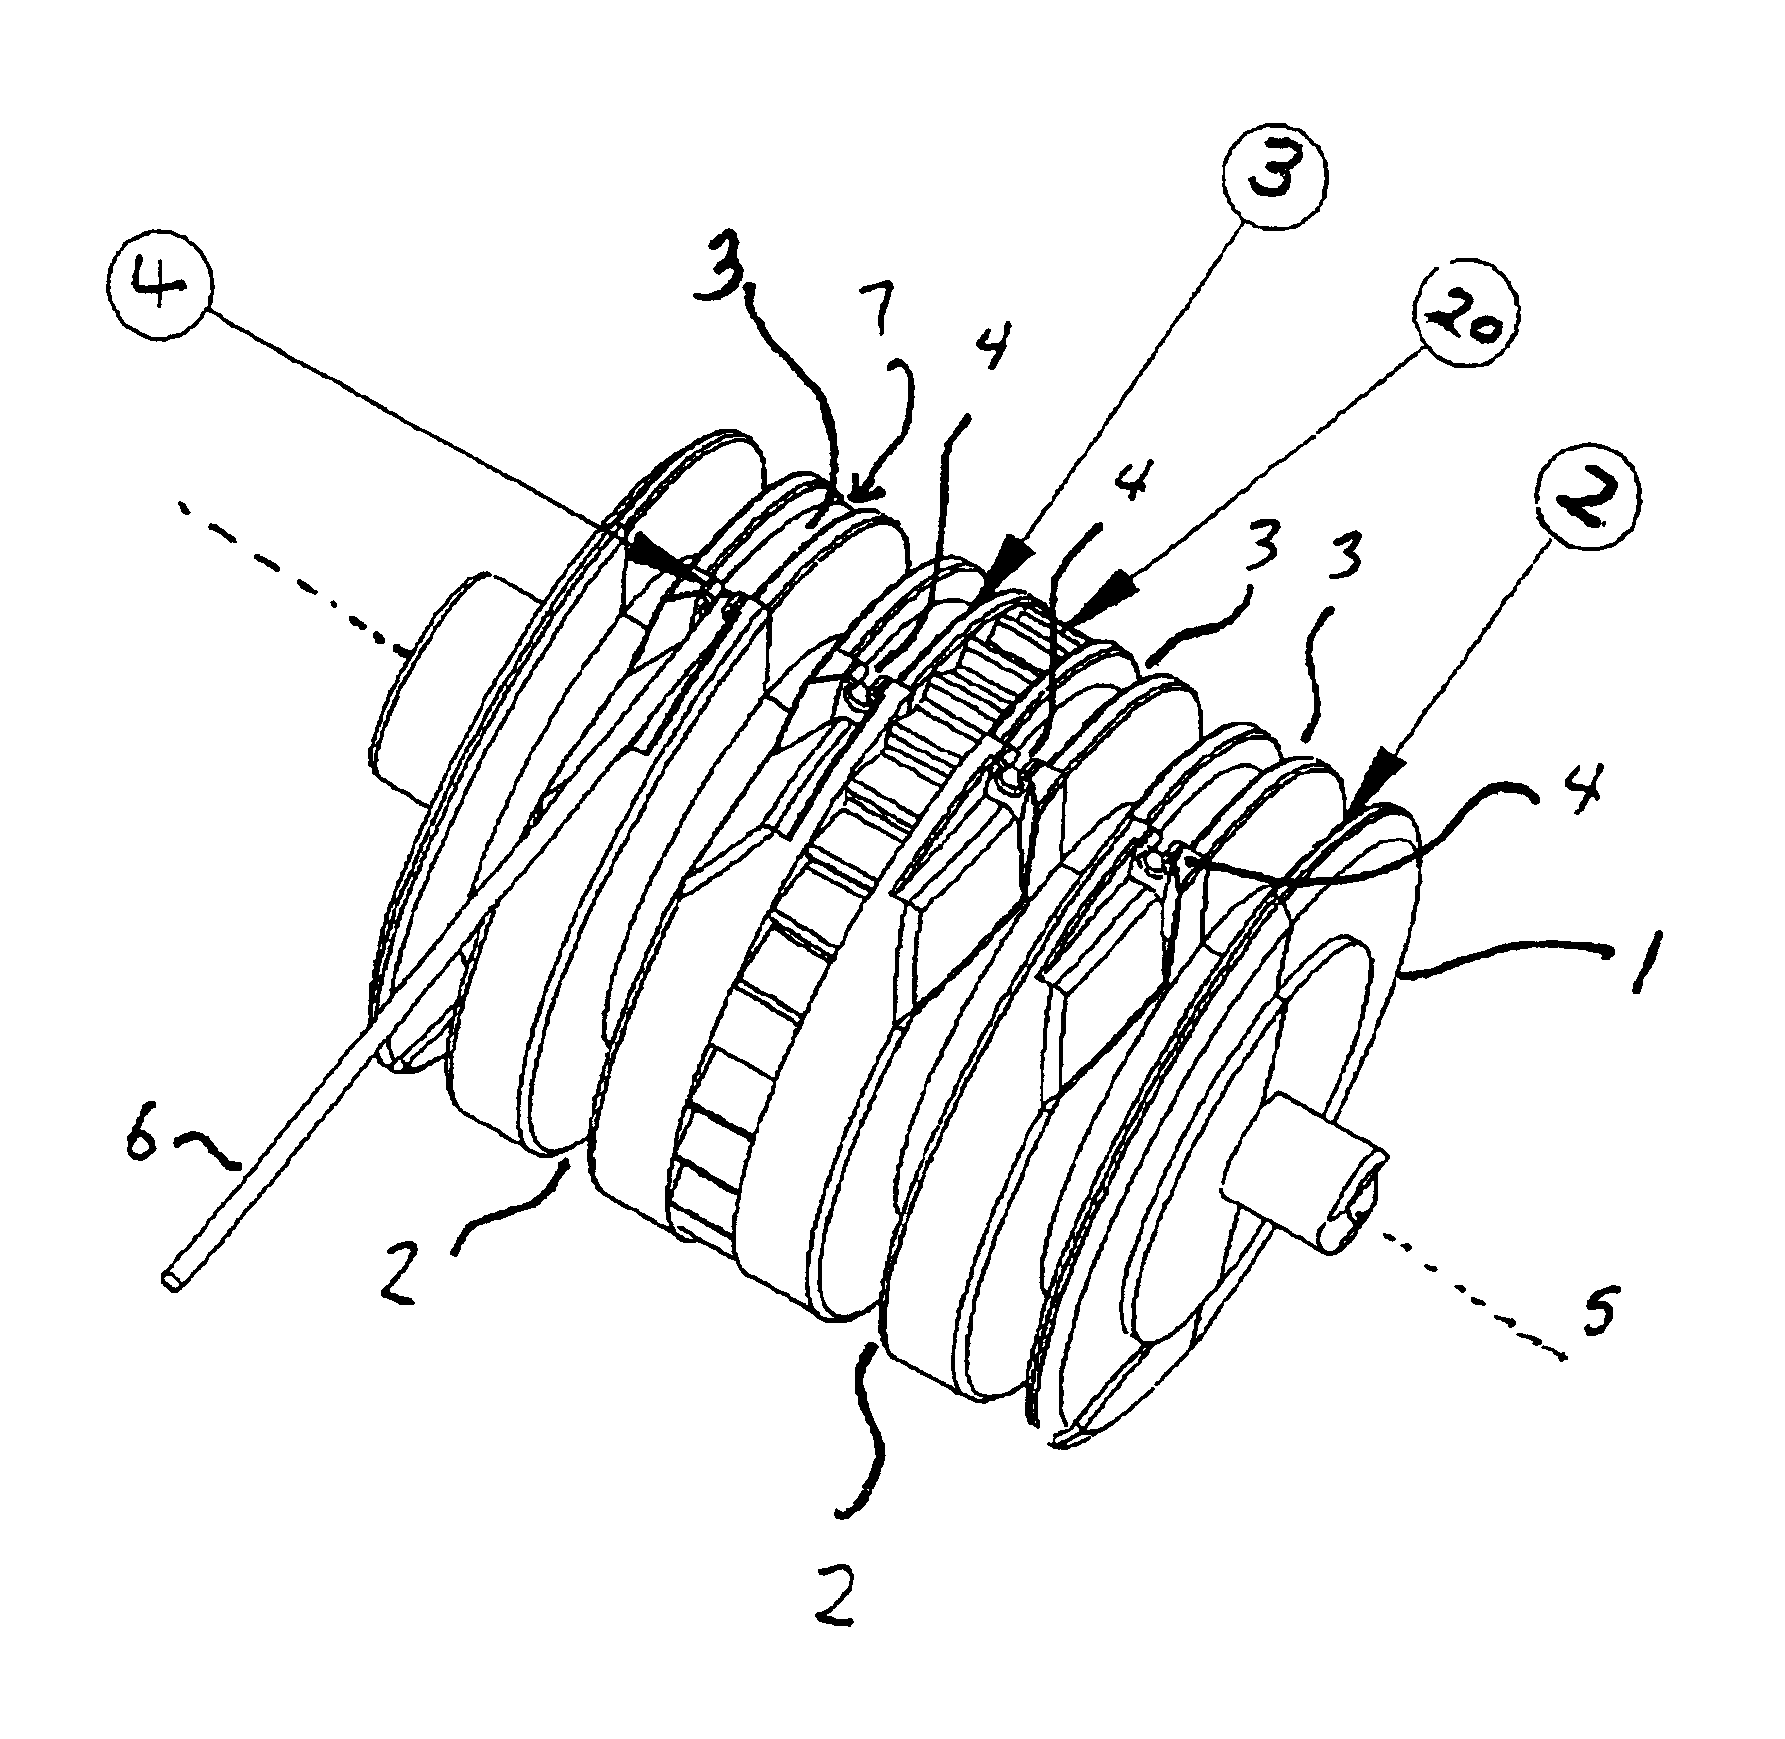 Device for inserting surgical implants